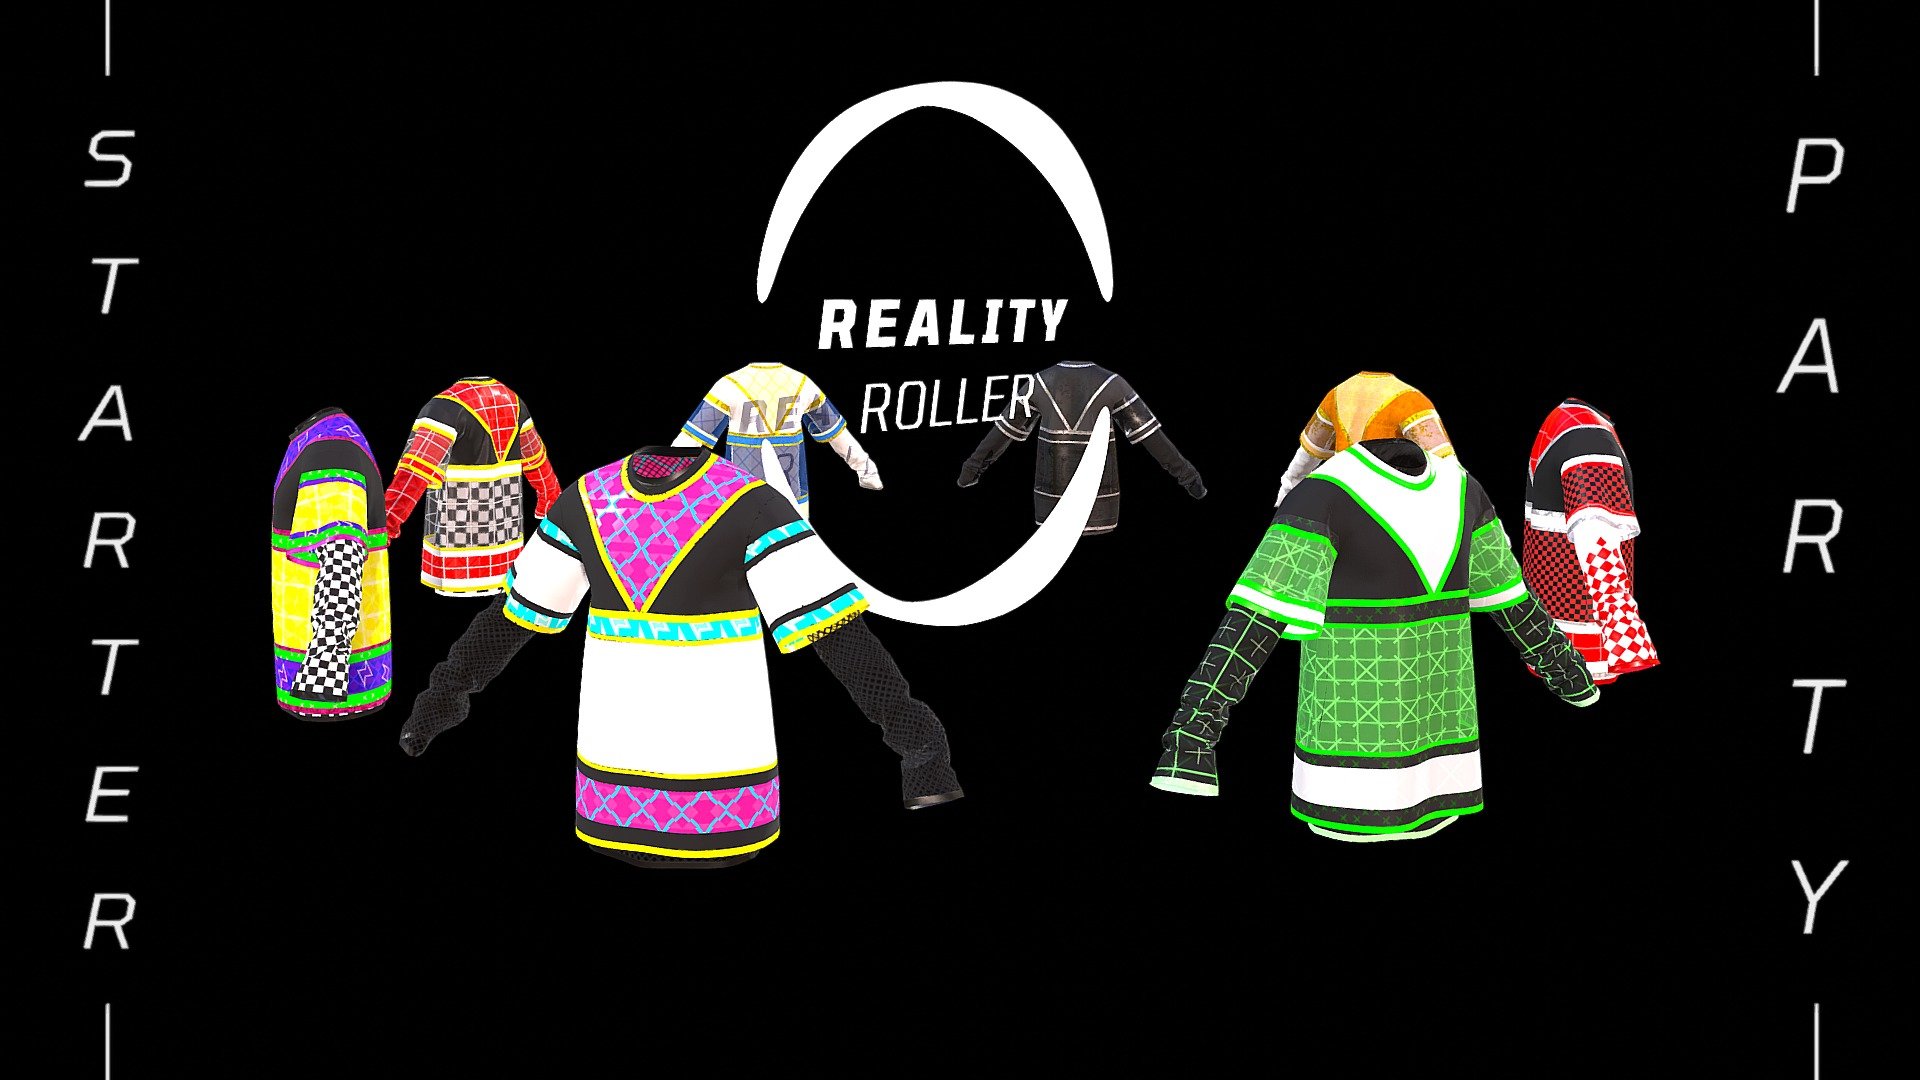 / / REALITY ROLLER - Digital Fashion / /
8 bold styles for party hopping and reality rolling - colors so loud screen calibrations will be doubted, and prints that say you always know where the party's at, cause you bring it wherever you go (A-YOO!)

-

Original Designs, Easy to use as is, as separate garments, mixed and matched or combined with my other outfits - 

-

All 8 shirt designs, HQ Texture packs (2048 + 4096 res) + OBJ + glTF High Mid and Low poly Shirt models shown here + Marvelous Designer / Clo3d files available now on my ArtStation store!

-

Shown here: High, Mid &amp; Low Poly meshes with and without Fabric Thickness (visible with wireframe overlay) / PBR Textures in 2048 resolution-


Diffuse
Metallic
Roughness
Normal
Opacity

-Original Design, inspired by scifi, raver, skater, cyberpunk, hiphop, luxury, the 90s styles and roller skating rinks- - Party Starter - Layered TShirts - Available now! - 3D model by RealityRoller 3d model